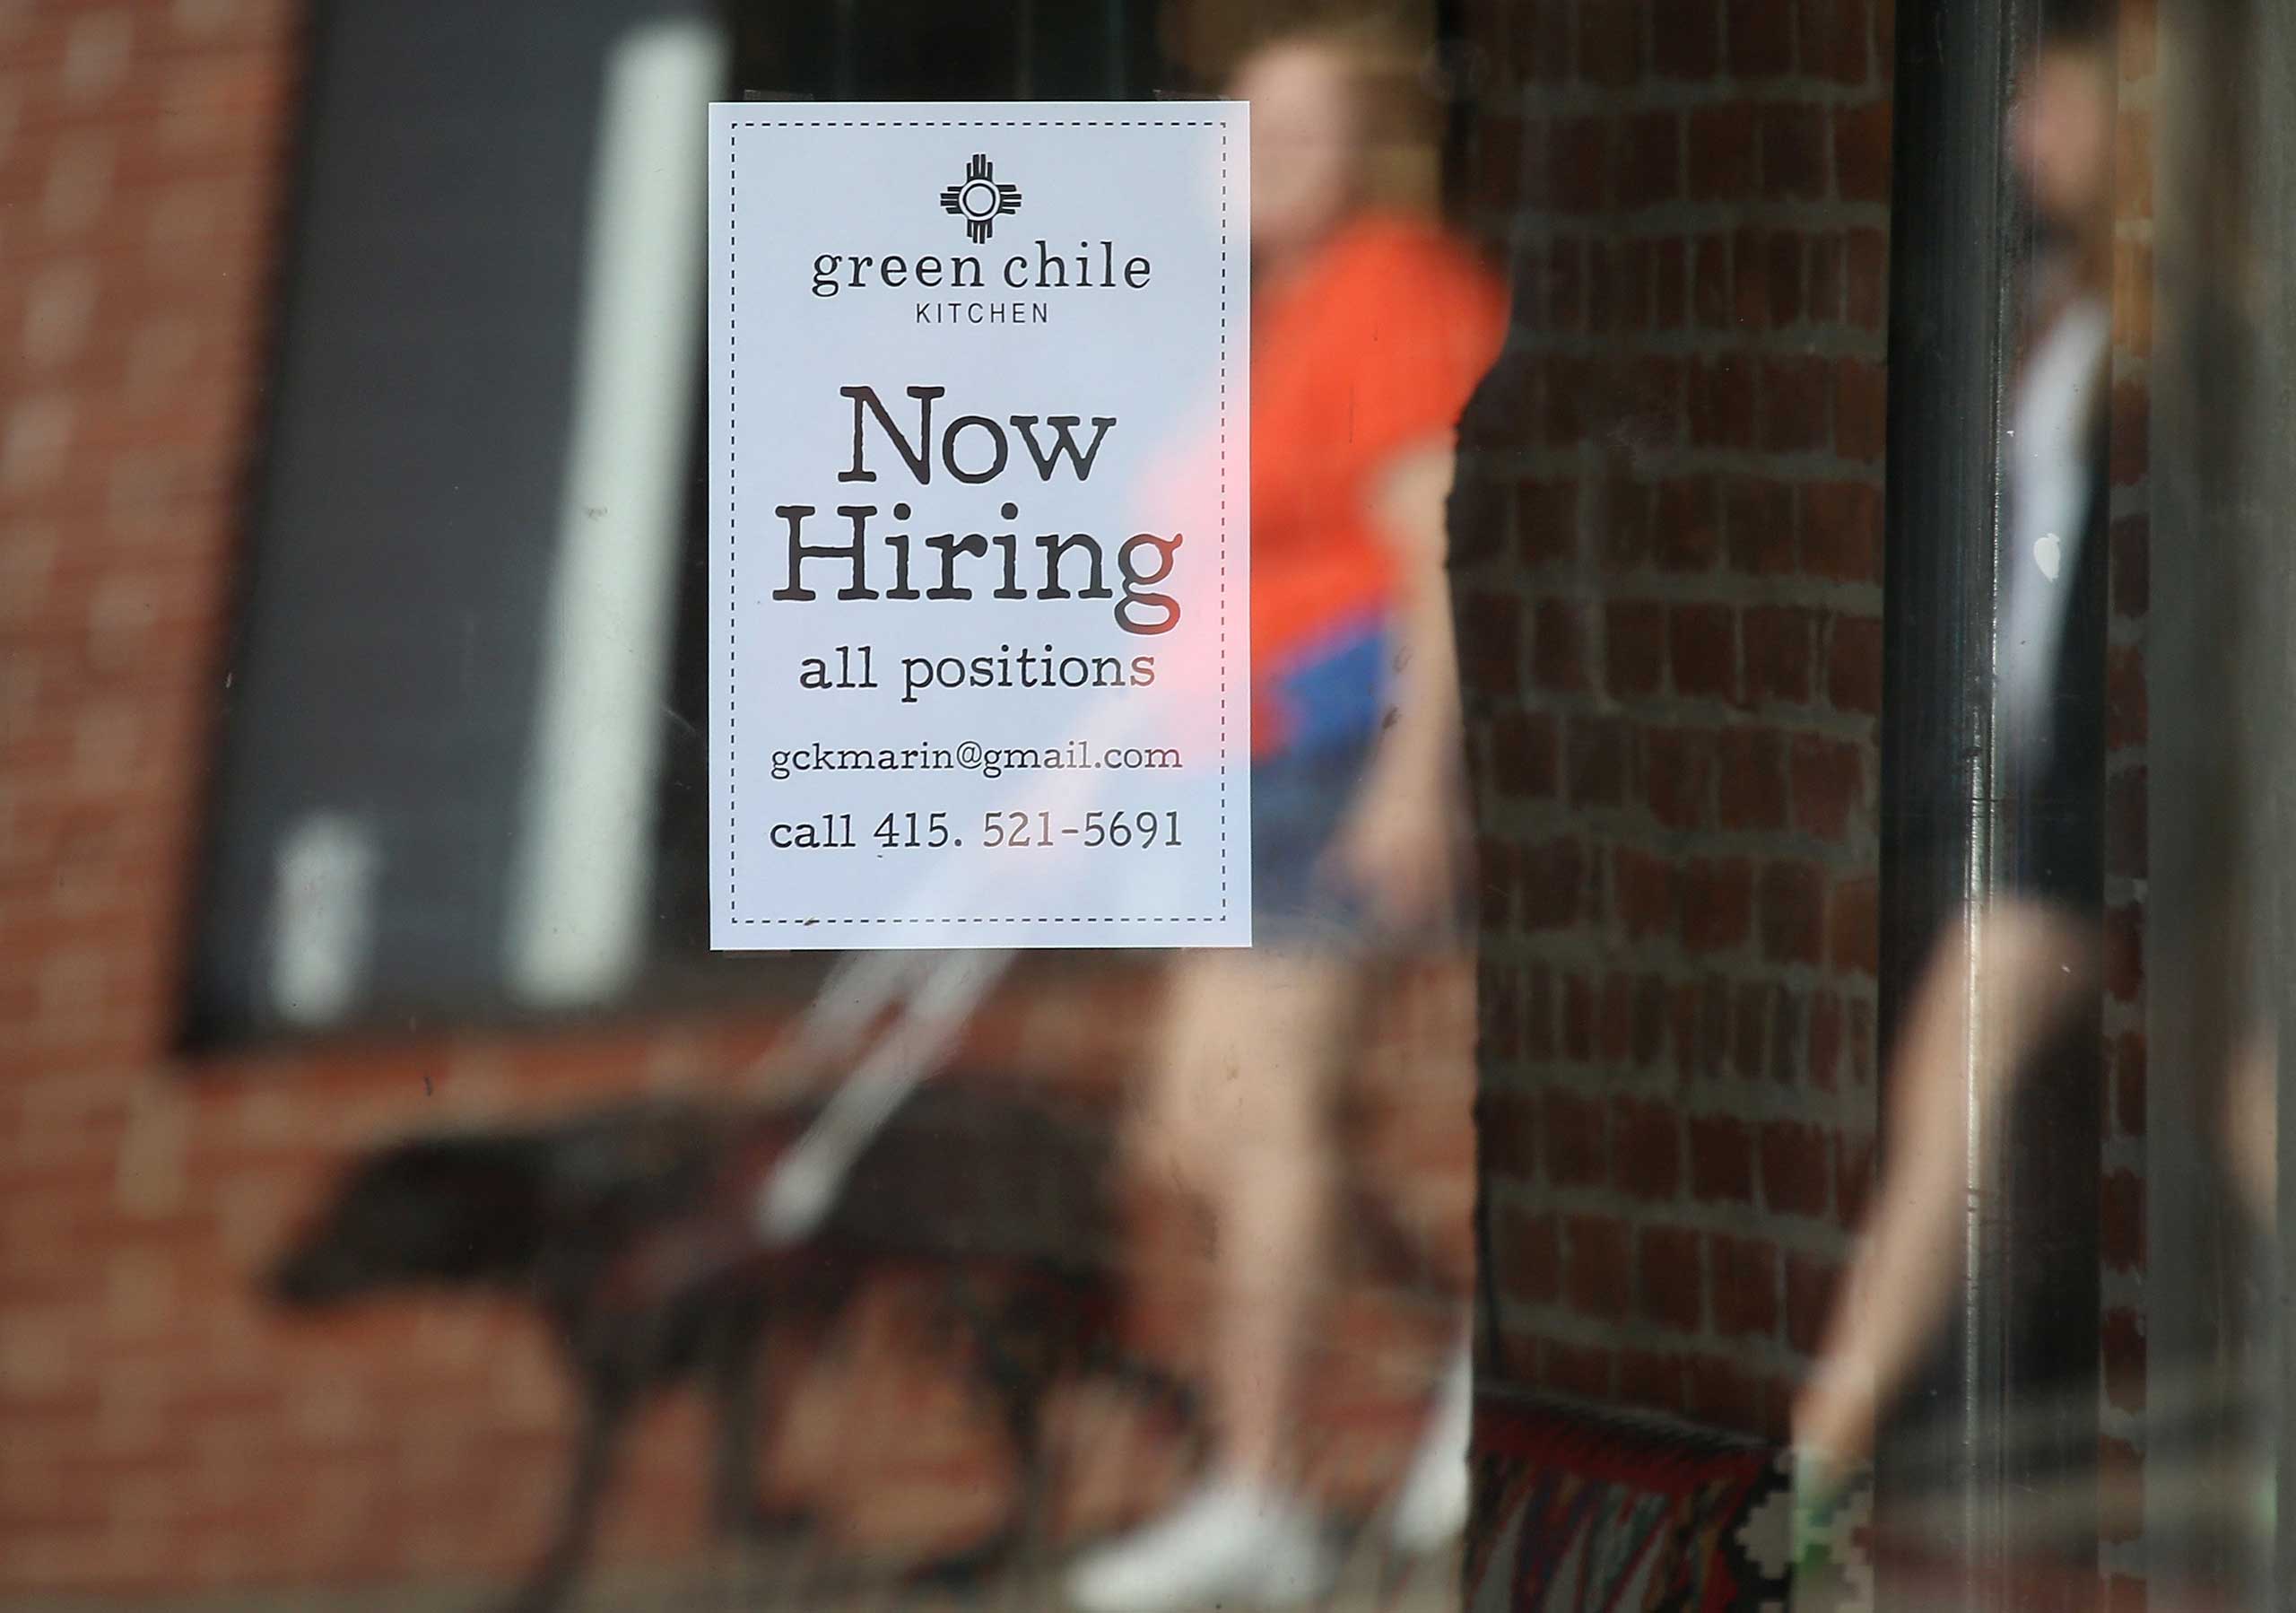 Pedestrians walk by a now hiring sign posted in the window of a business on Nov. 7, 2014 in San Rafael, Calif. (Justin Sullivan—Getty Images)